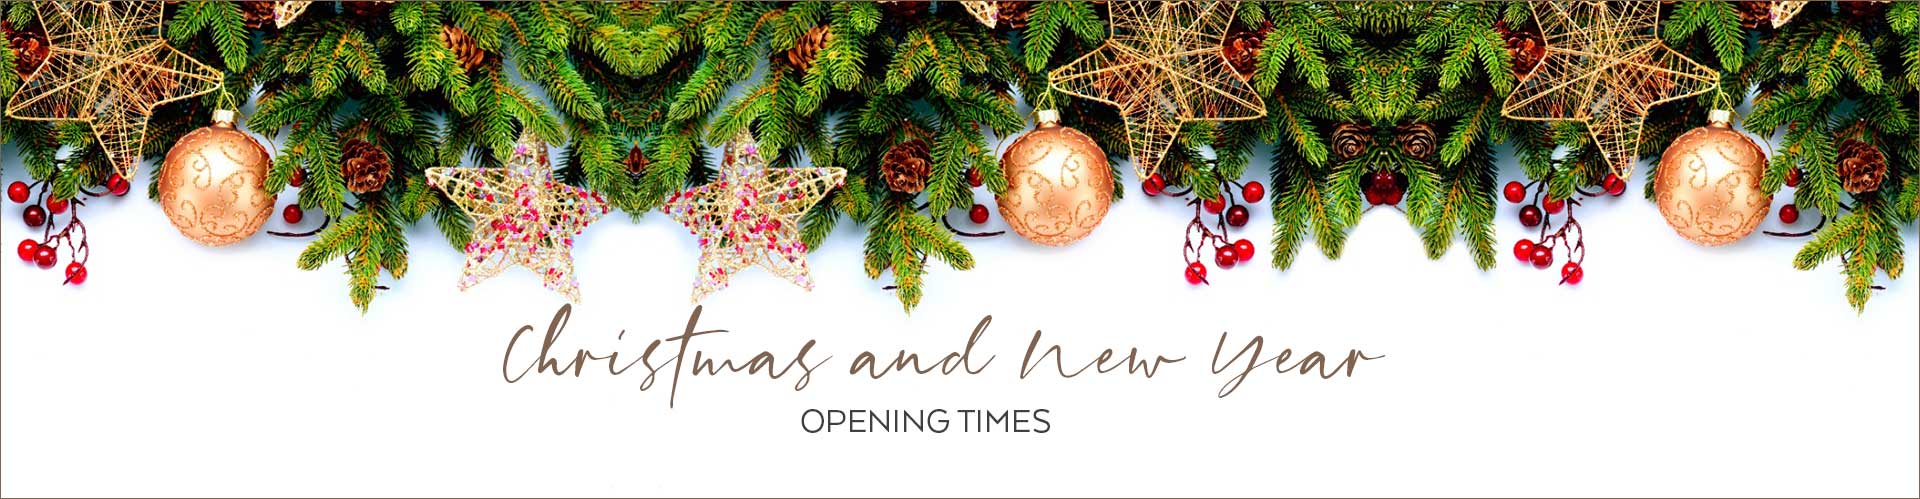 Christmas and New Year Opening Times Salon